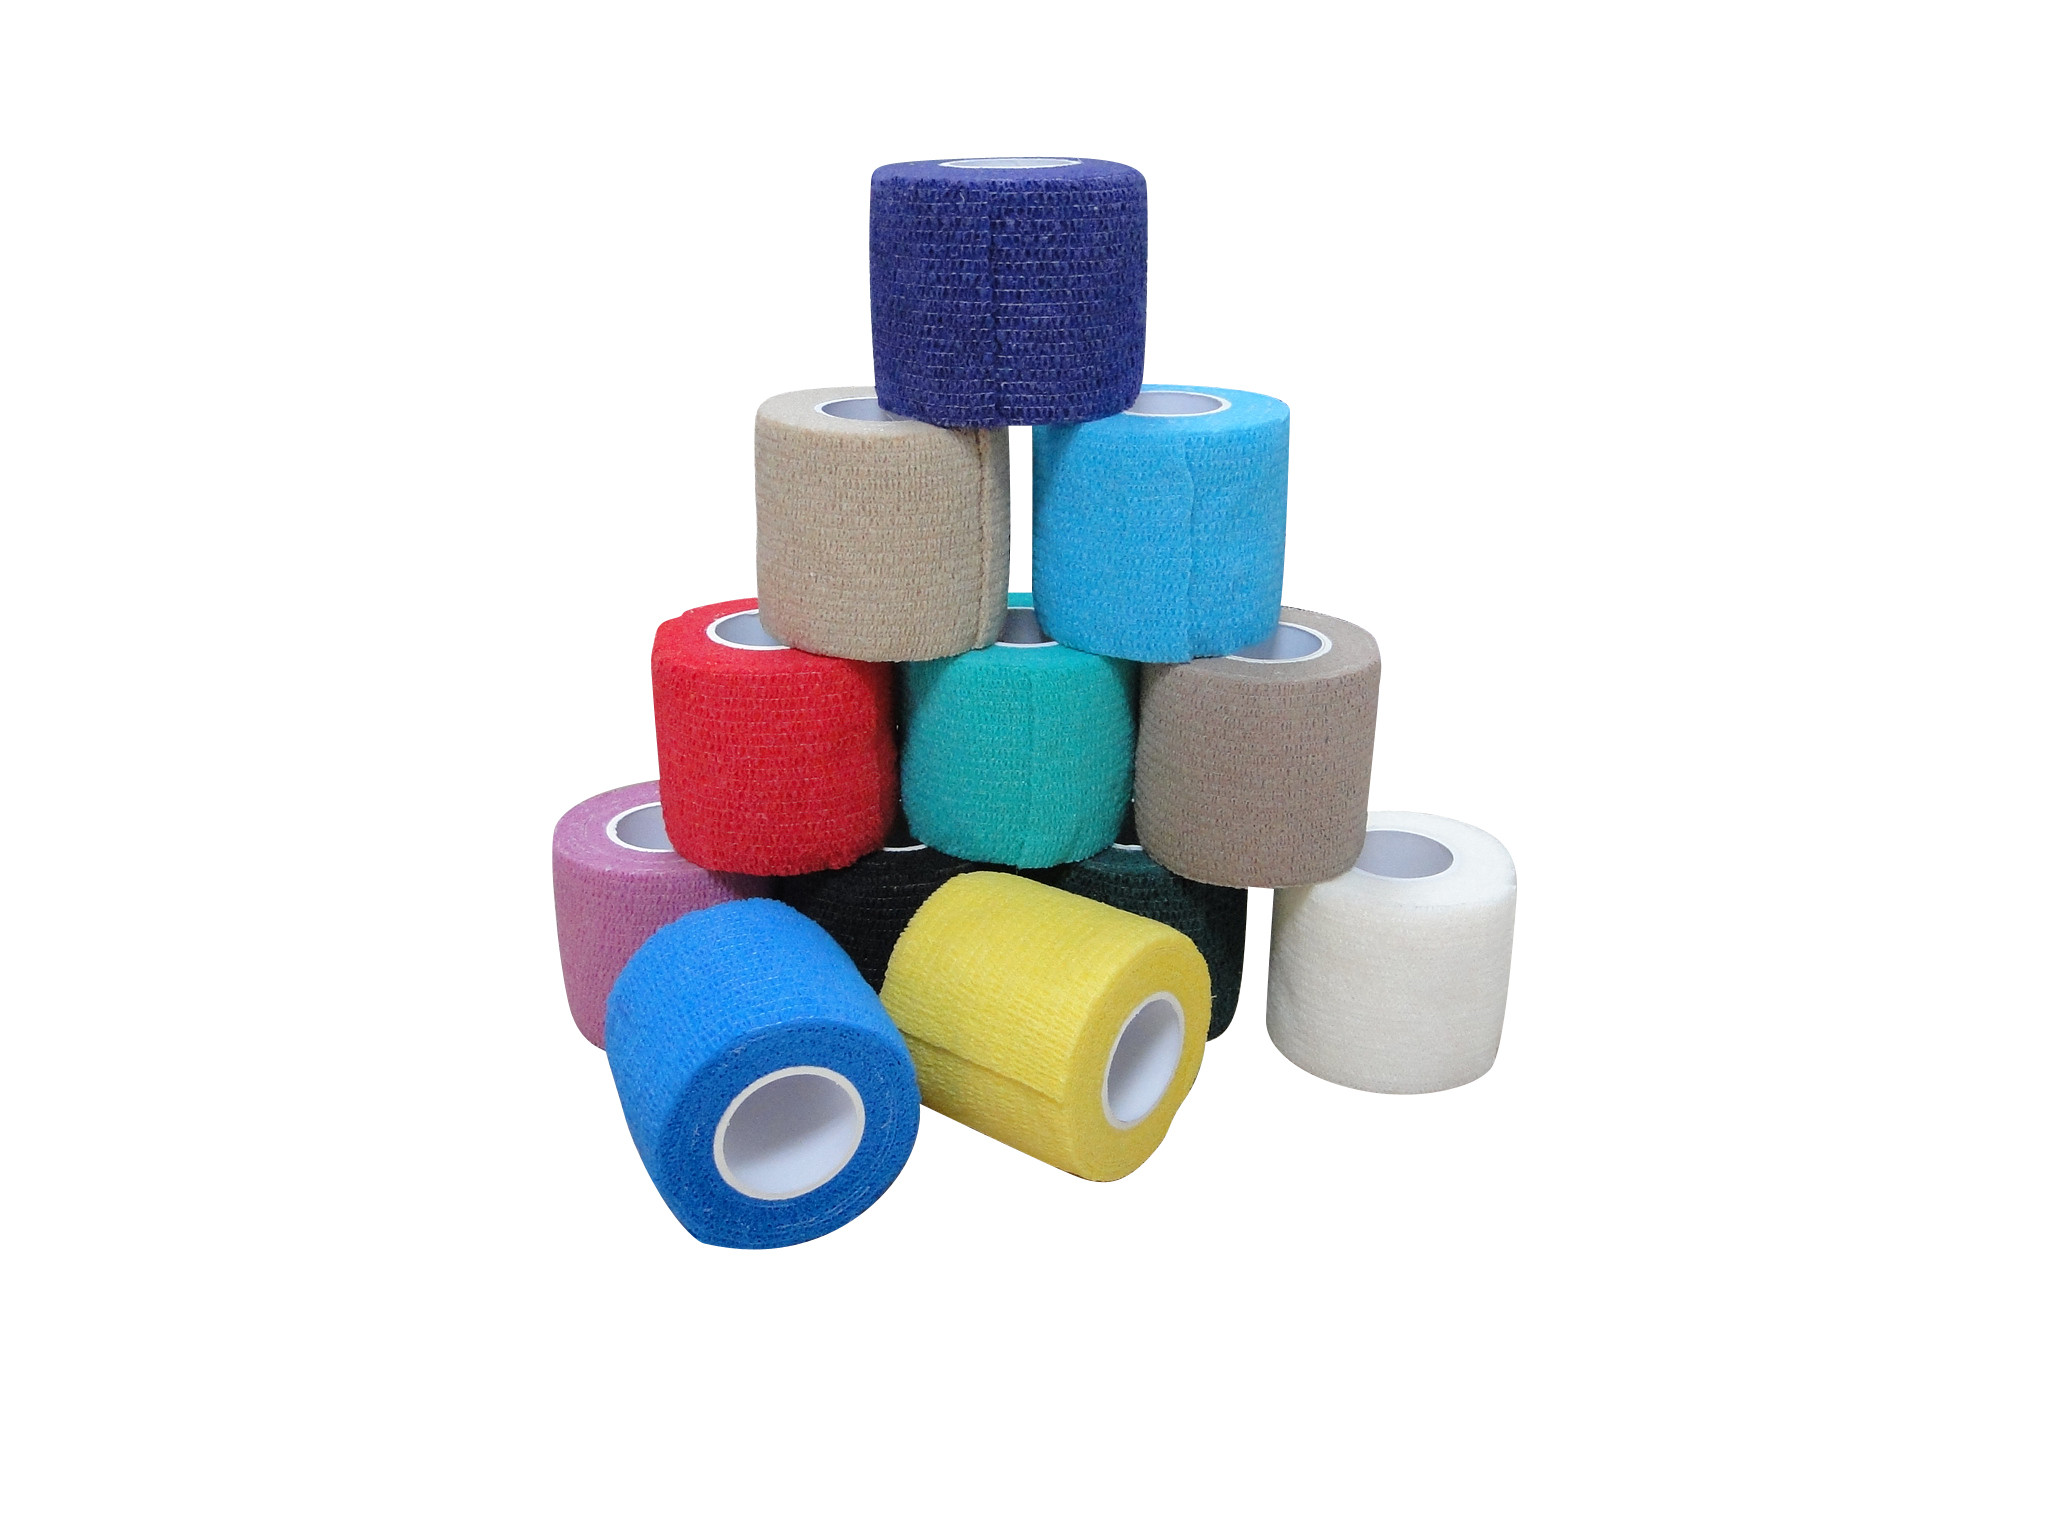 Buy cheap Breathable Latex-free Self - adherent Compression Cohesive Flexible Bandage Wrap from wholesalers